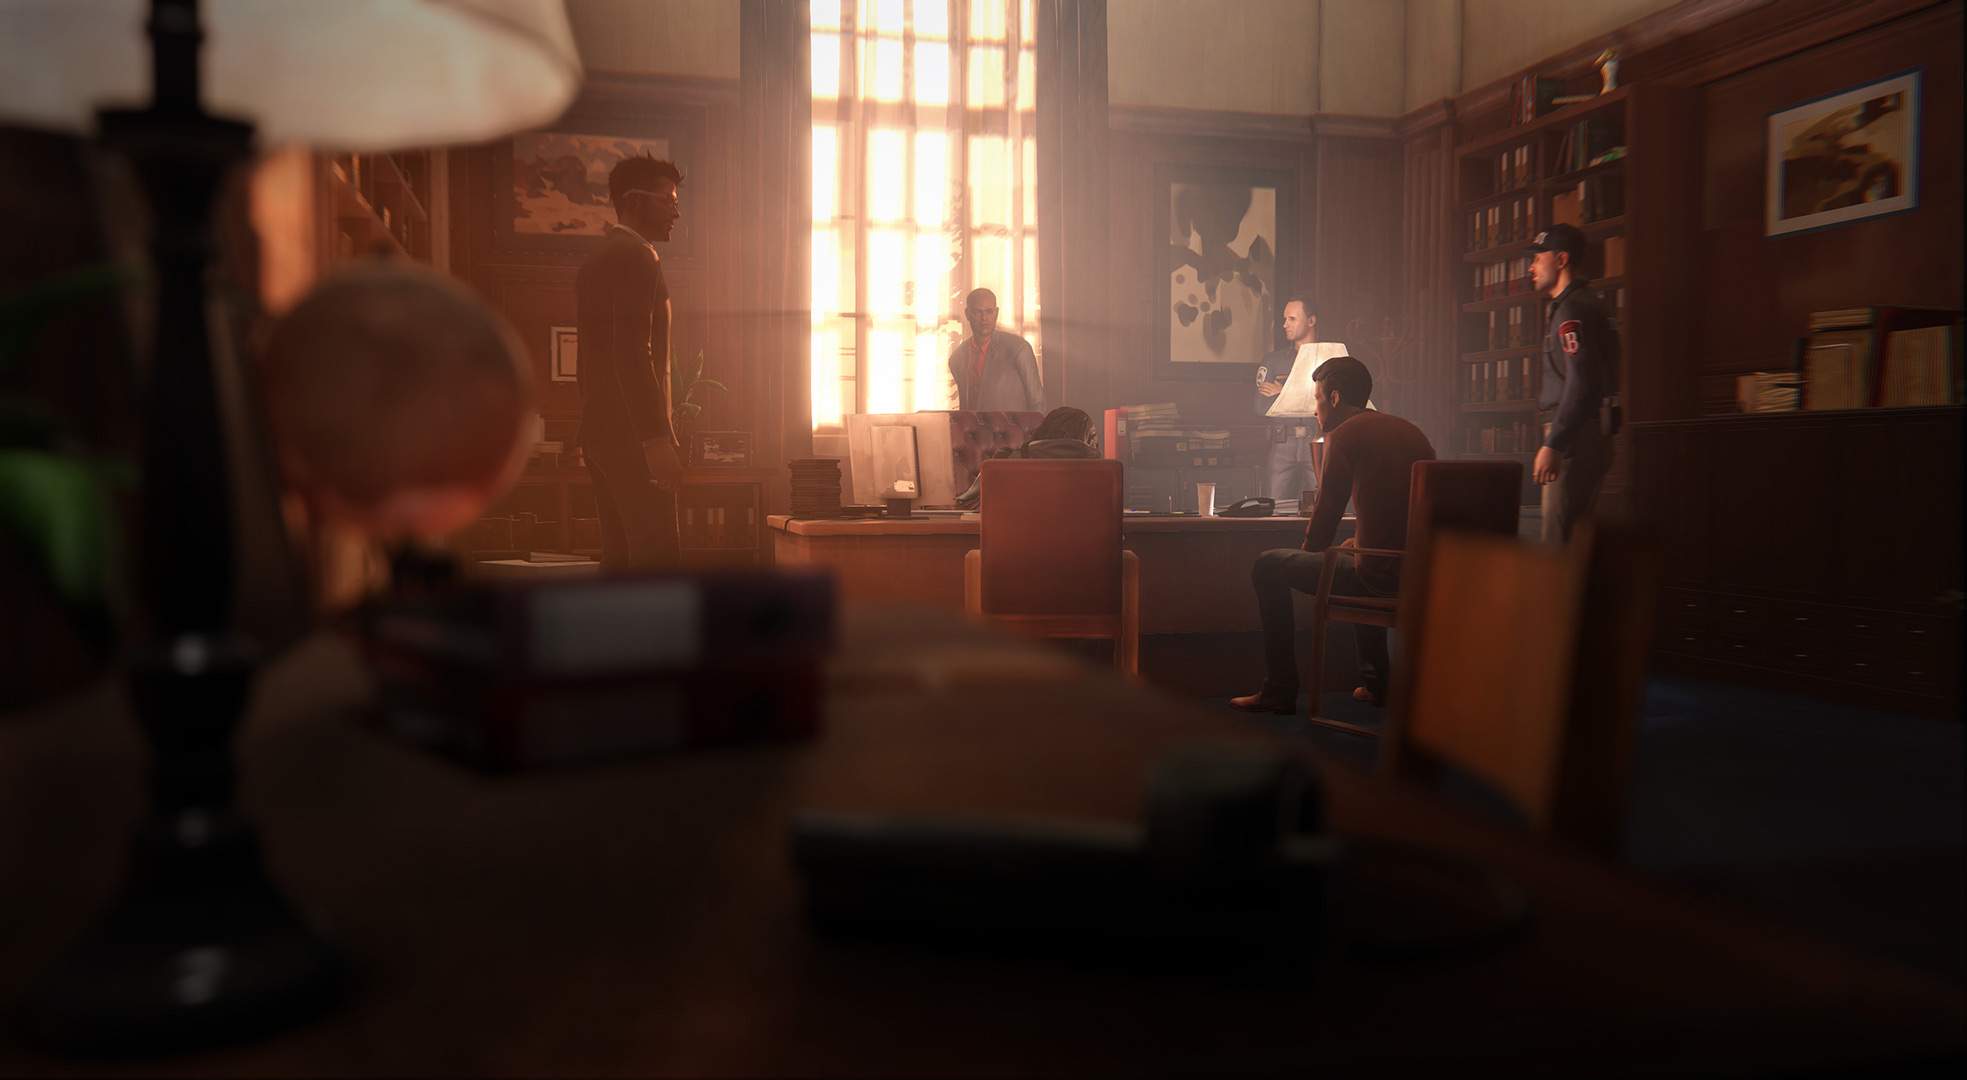 Principal Wells has gathered Jefferson, Nathan, and David in his office to discuss a concerning issue.